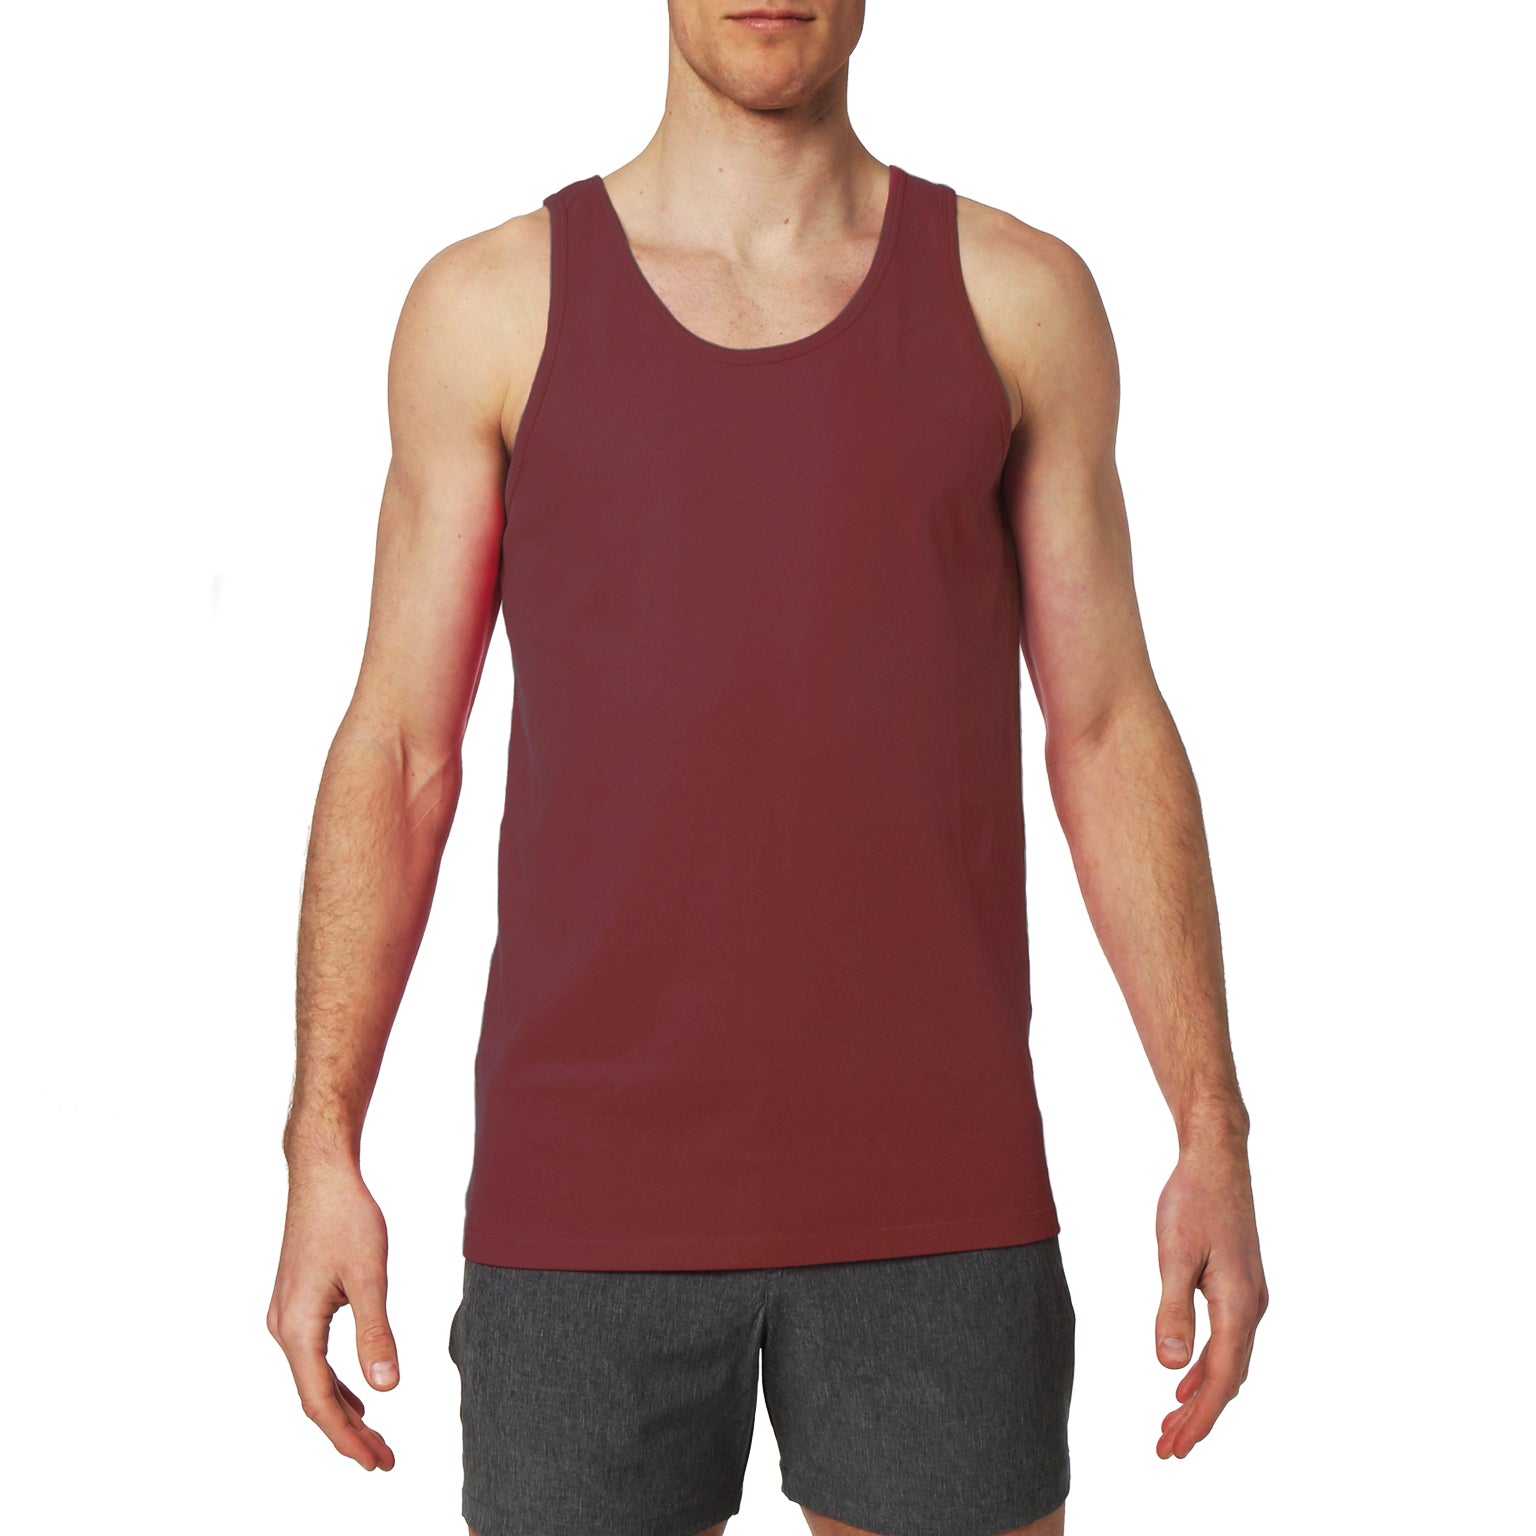 ACTIONWEAR Cabernet Solid Cotton Tank Top